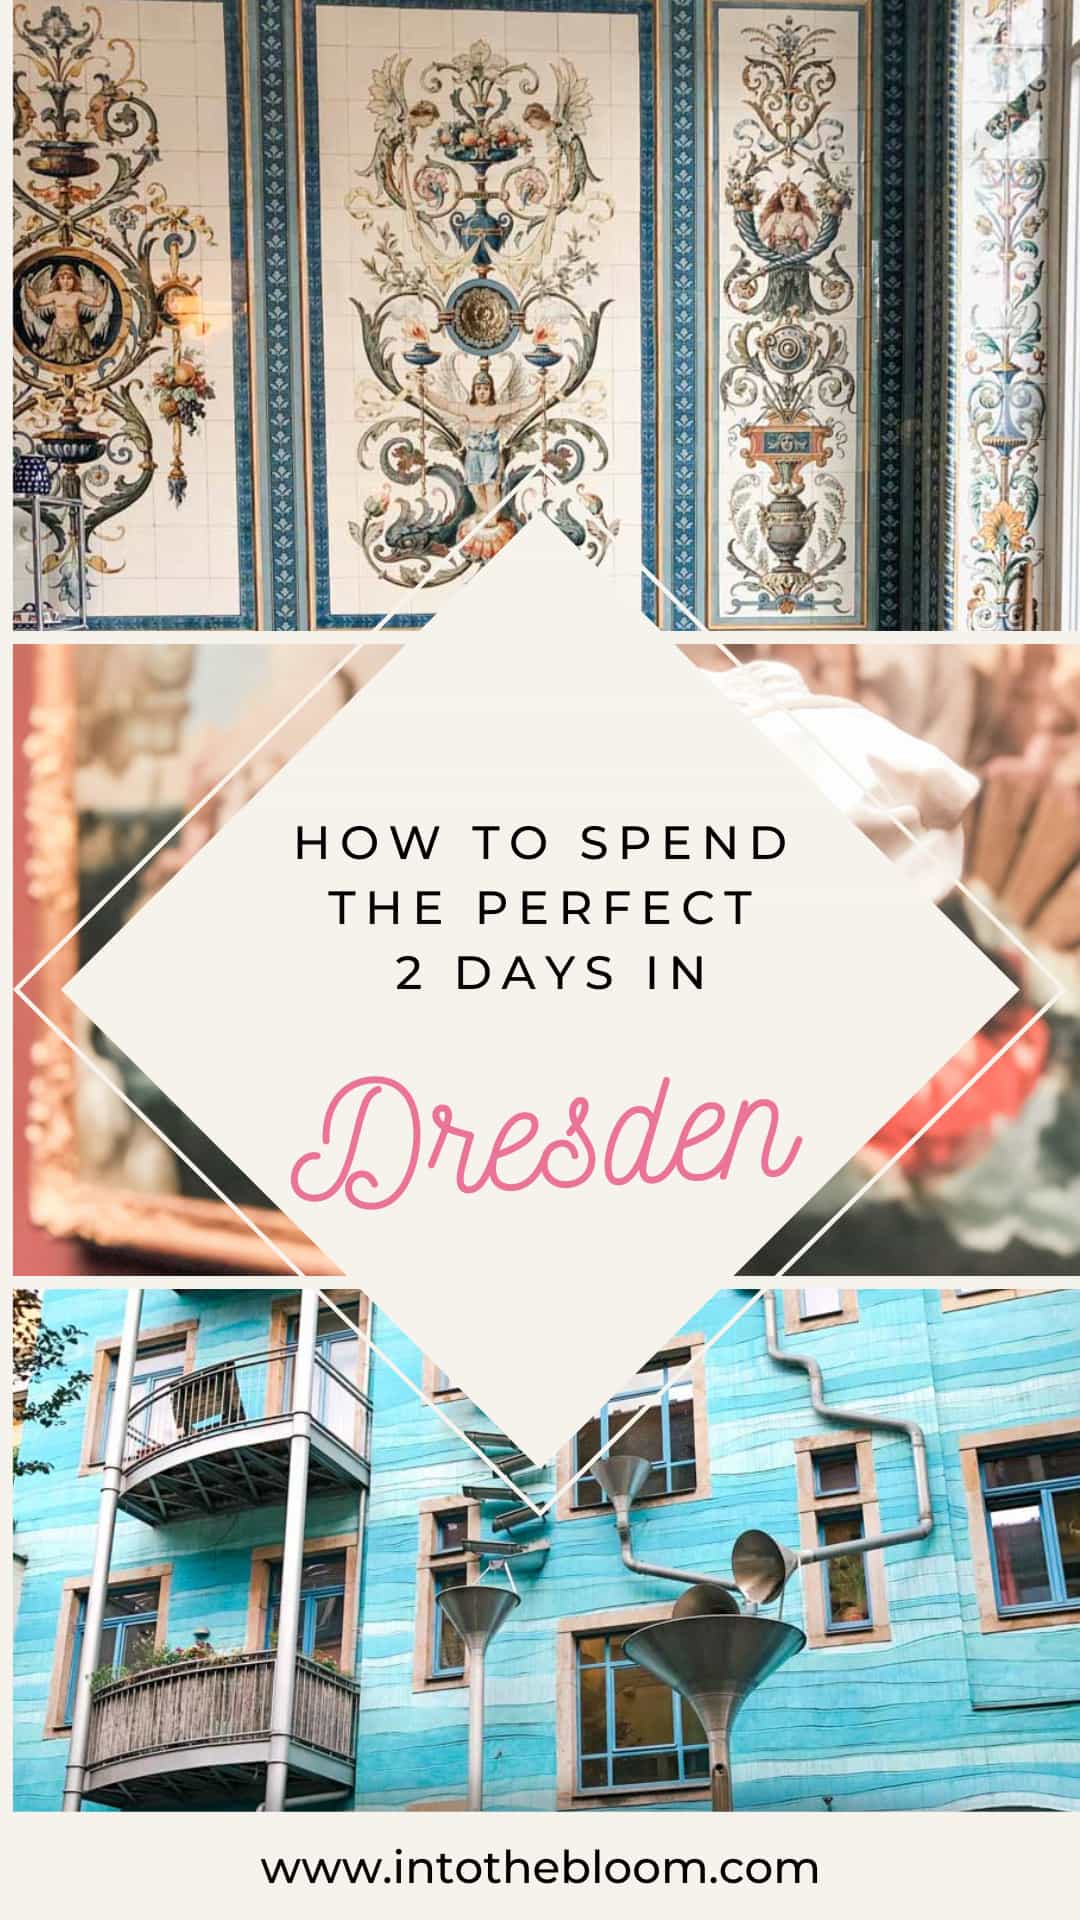 How to spend the perfect 2 days in Dresden - best places to stay, see, and eat